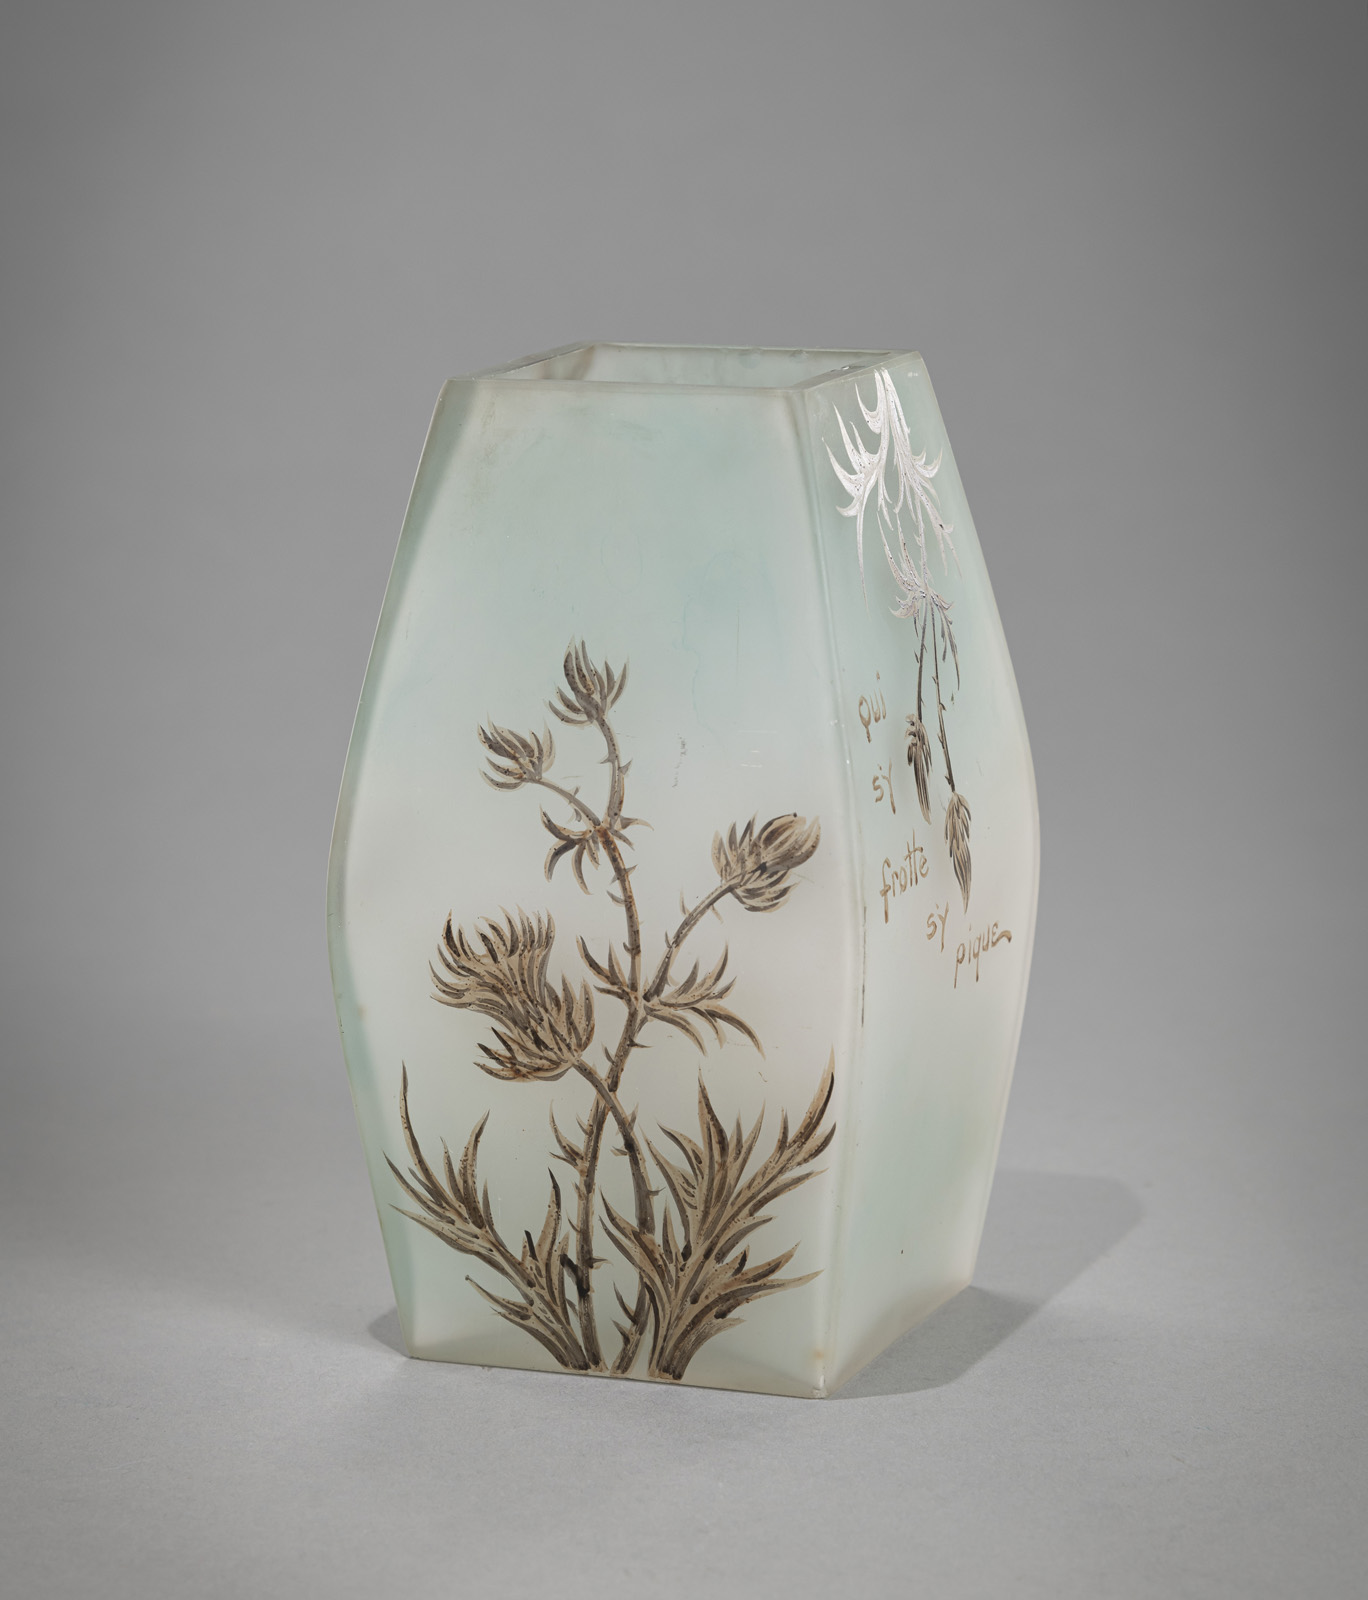 AN ENAMEL PAINTED THISTLE PATTERN GLASS VASE - Image 3 of 7